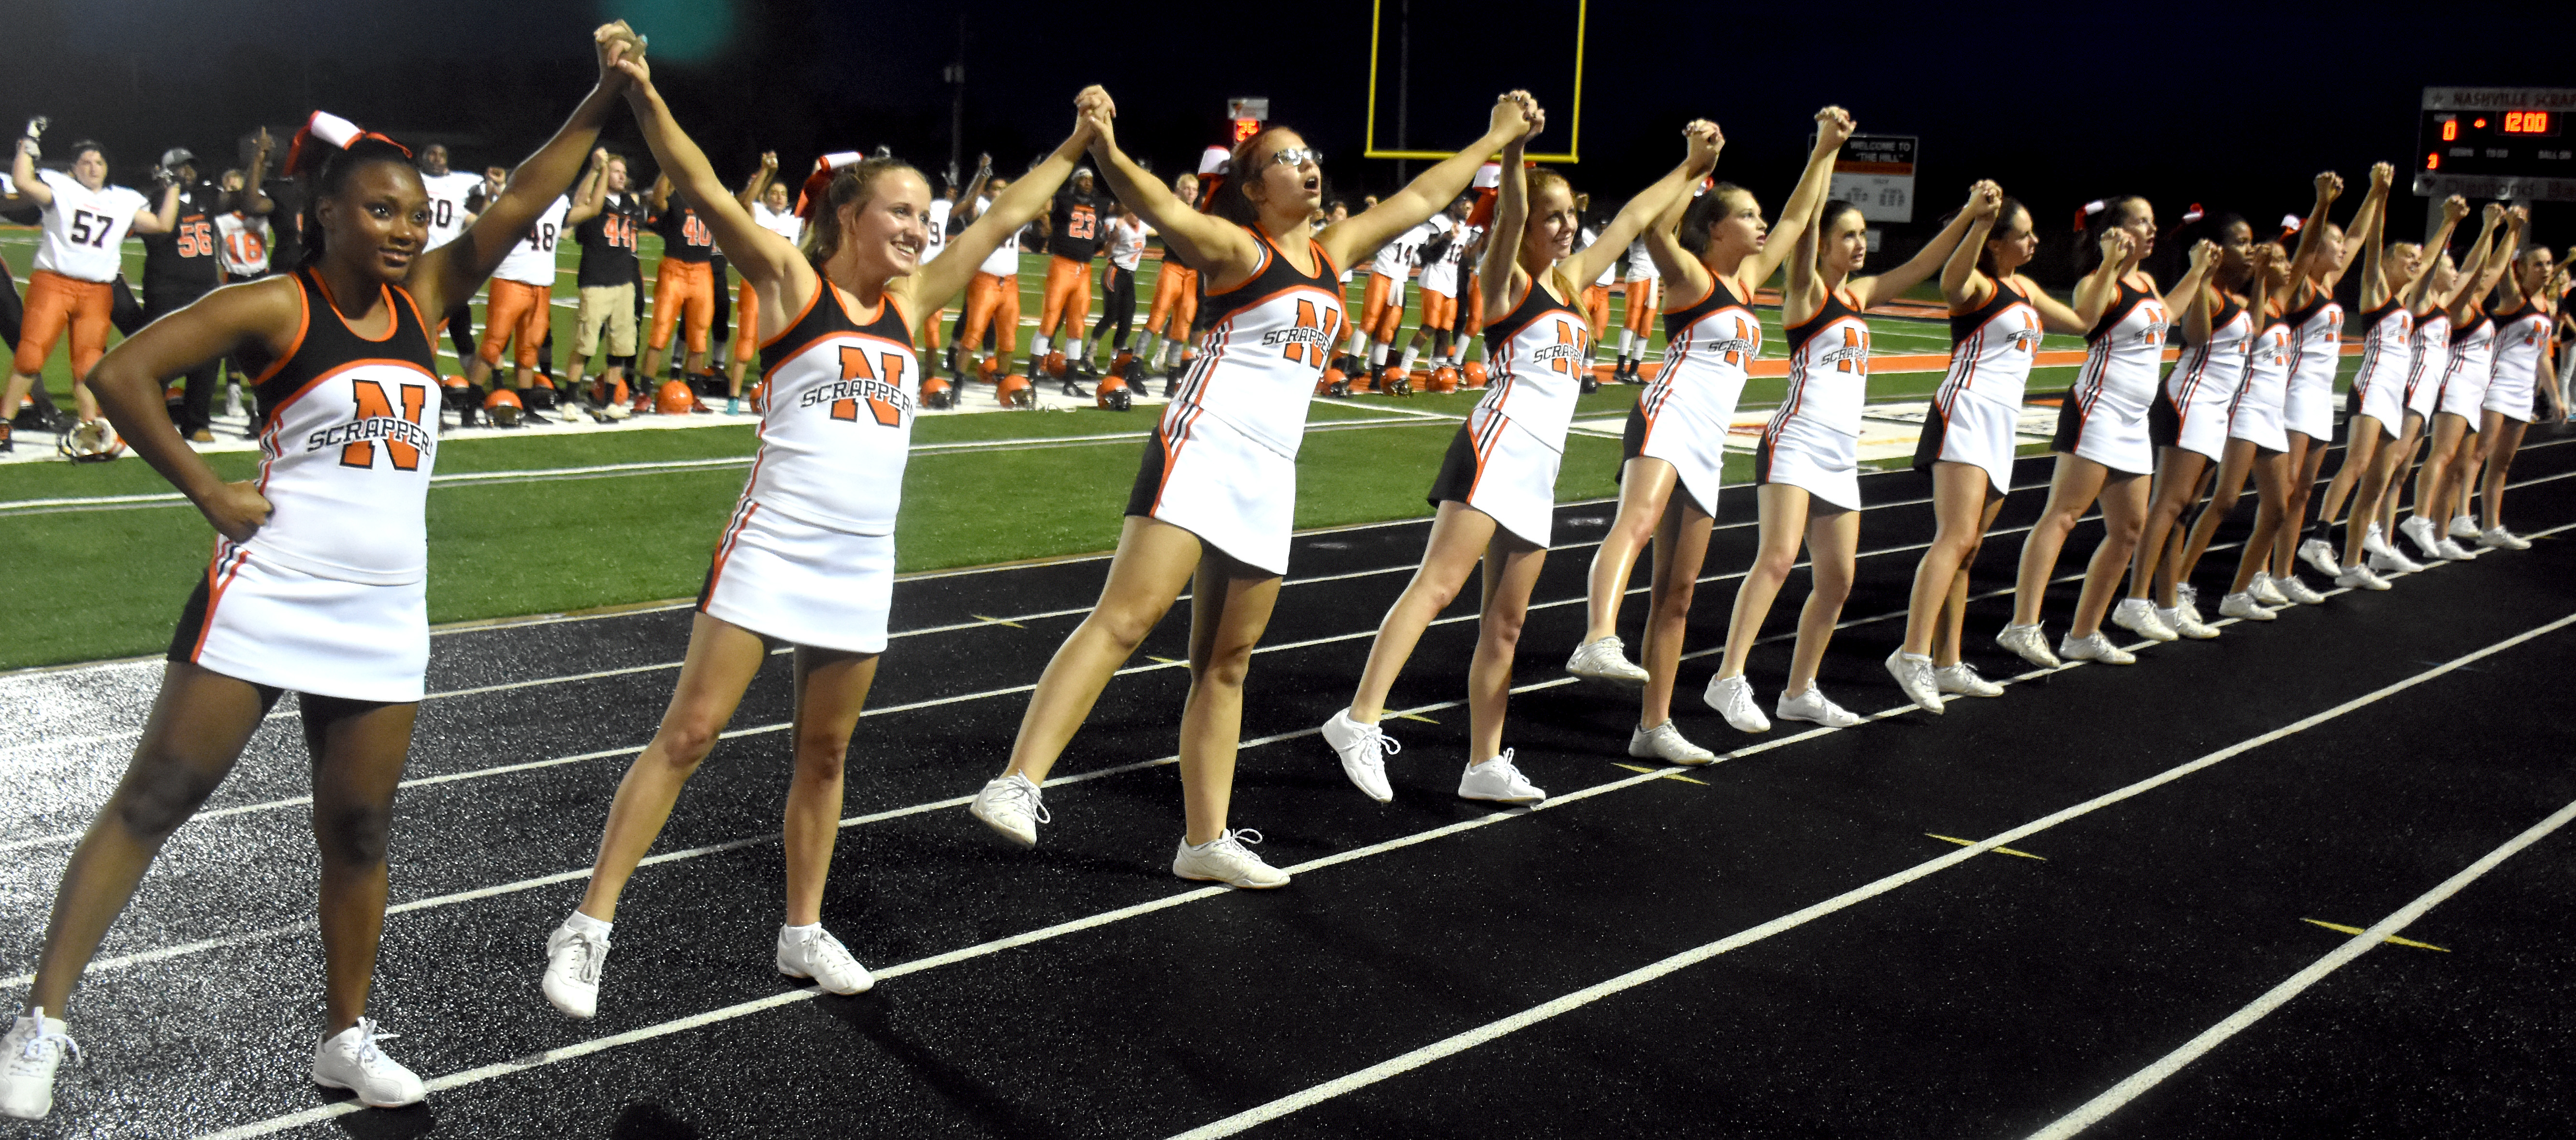 The Scrapper Cheerleaders sing the NHS Alma Mater Friday night at the Back-to-School Bash.